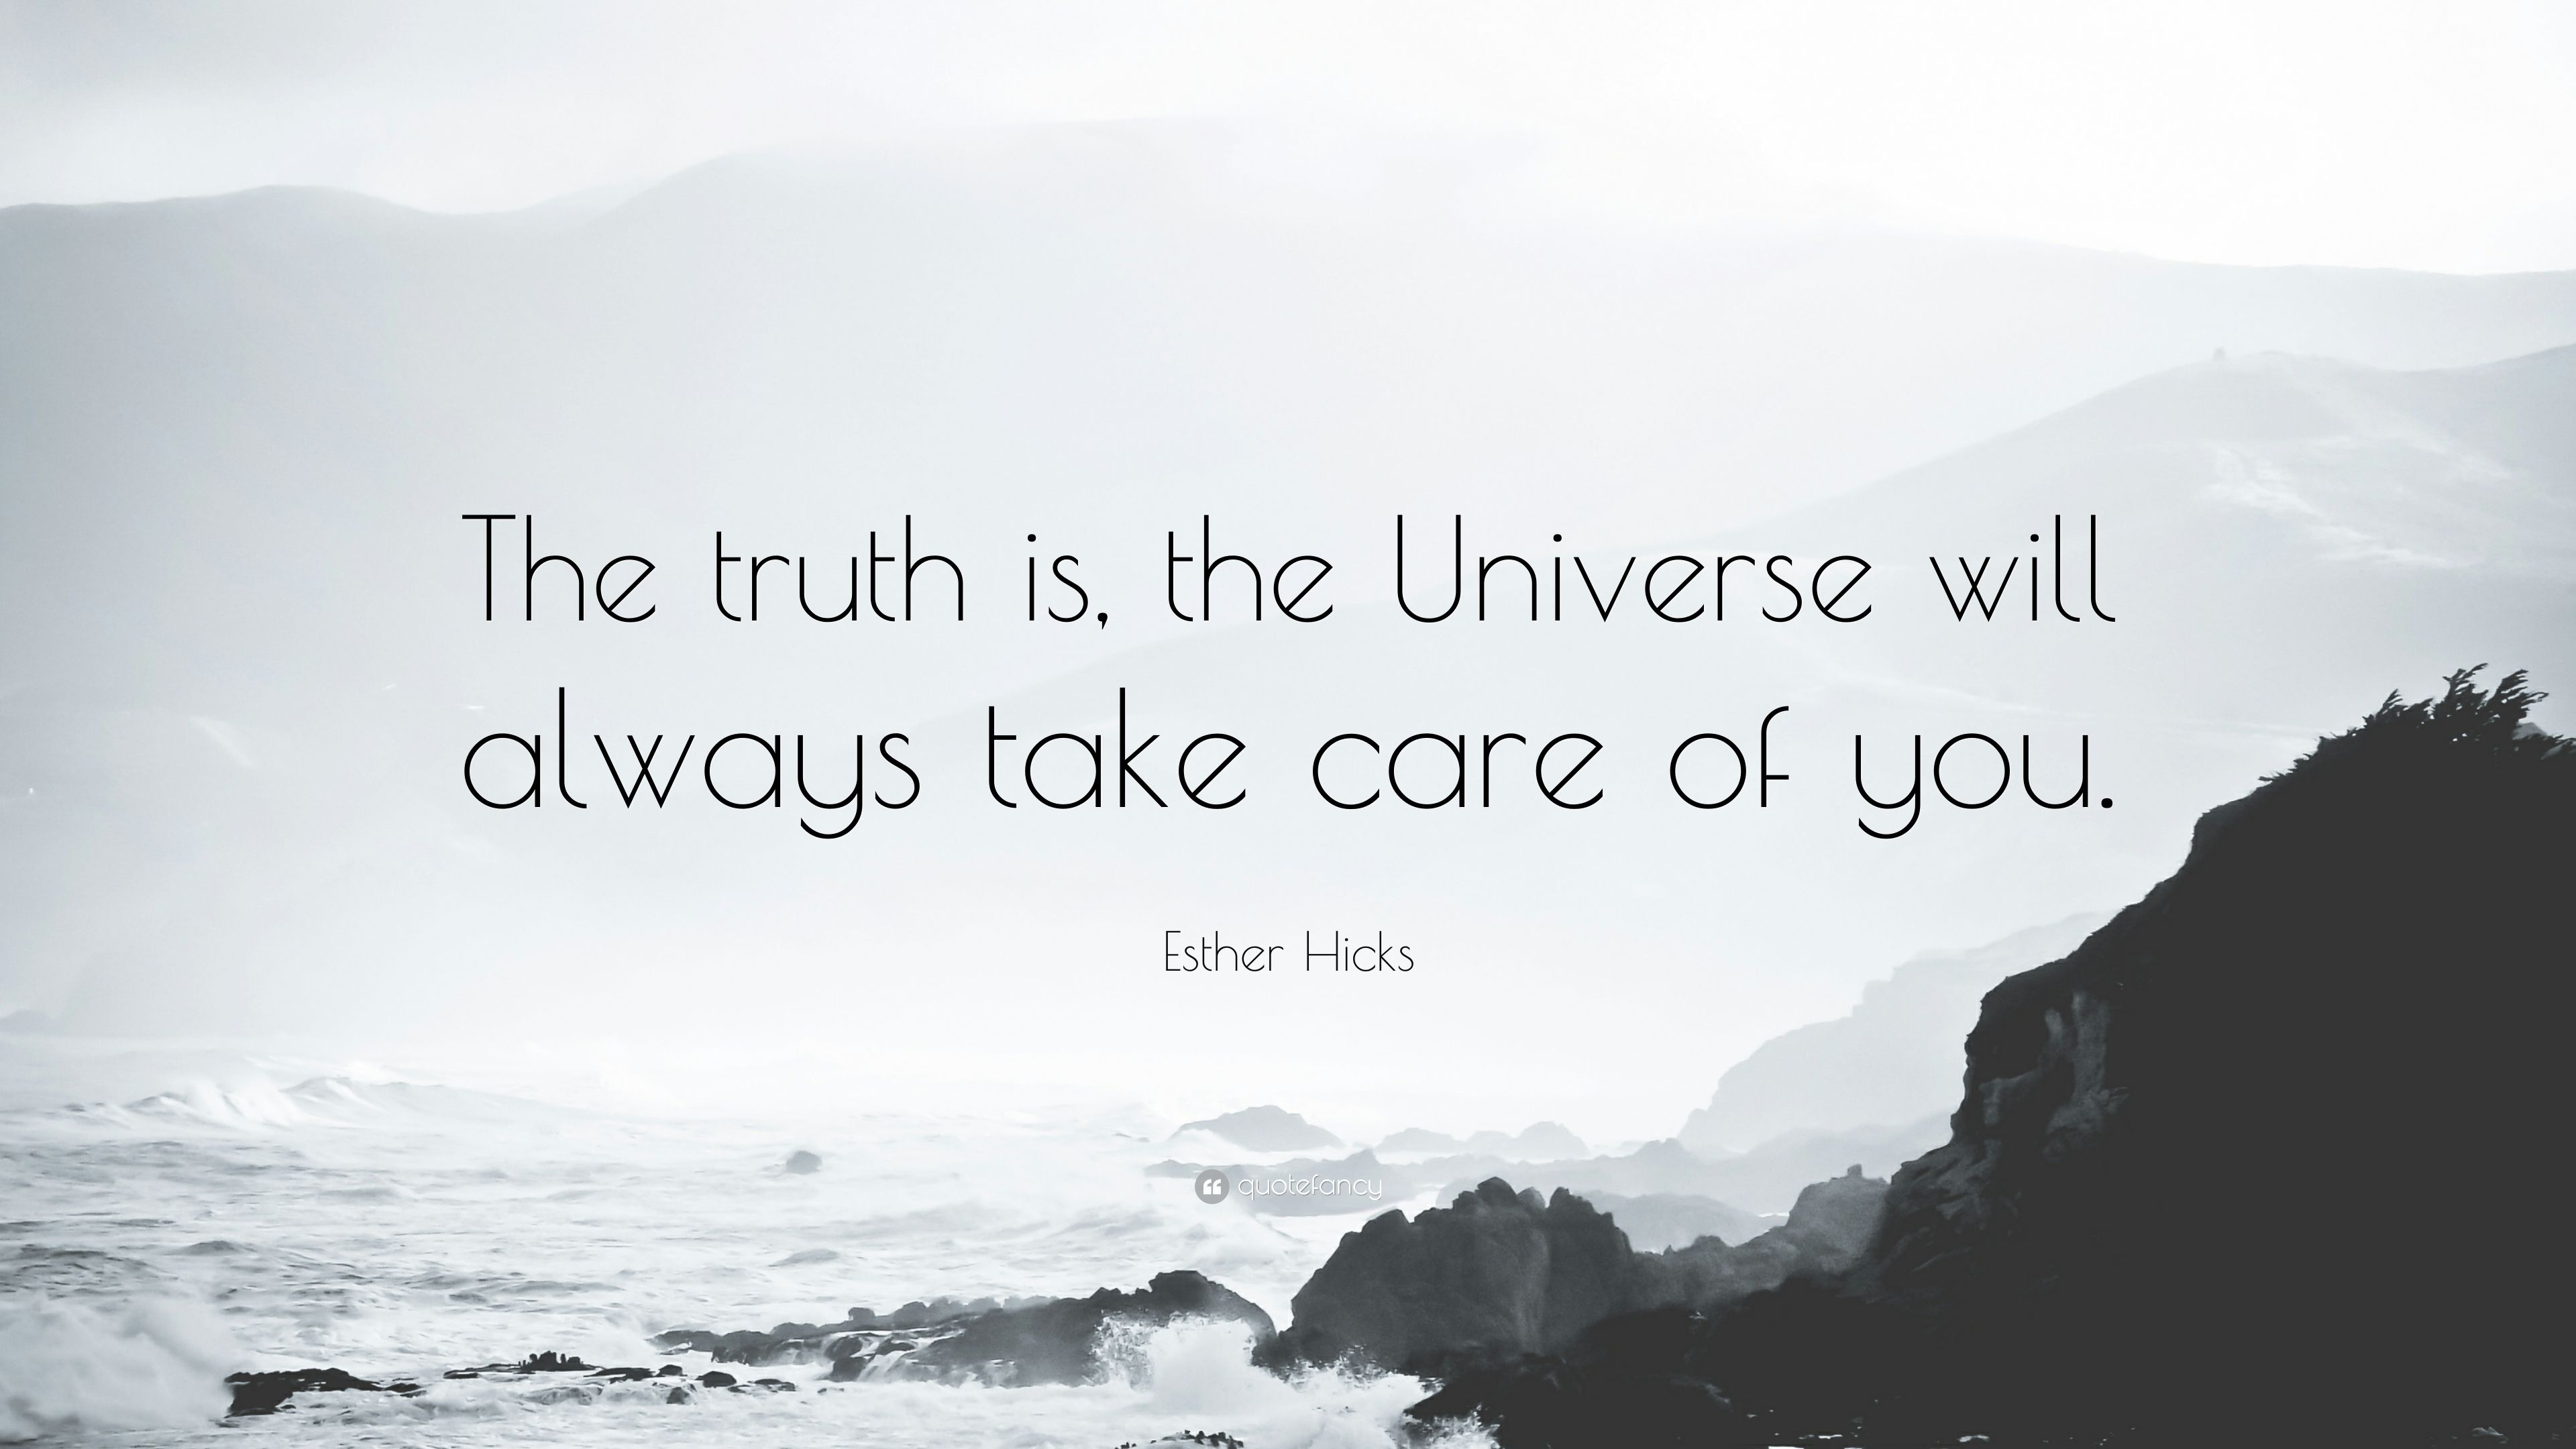 Esther Hicks Quote: “The truth is, the Universe will always take